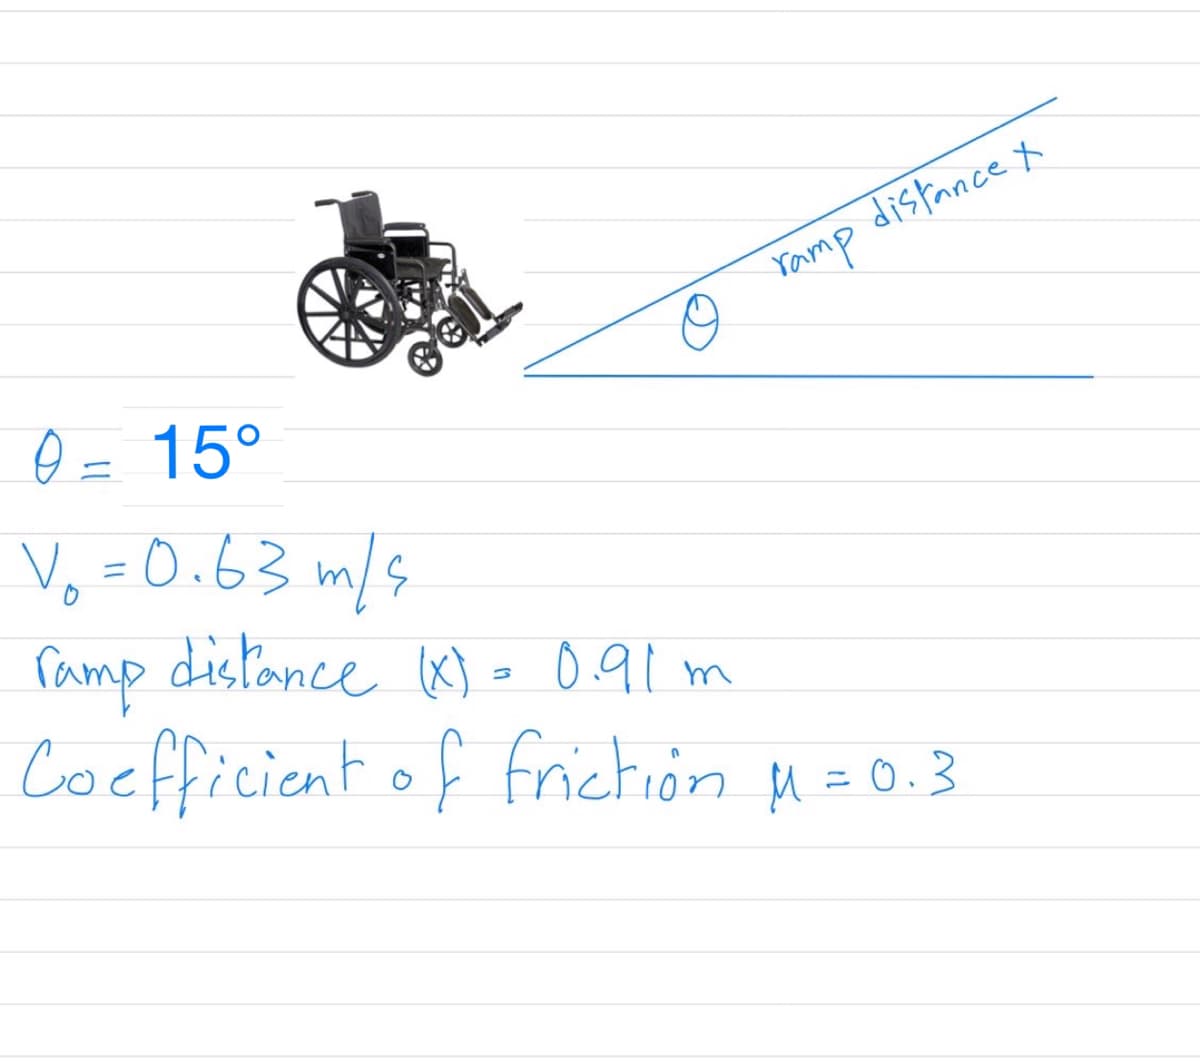 Yamp distance x
O = 15°
Vo = 0.63 m/s
ramp distance X) = 0.91 m
Coefficient of friction M =0.3
